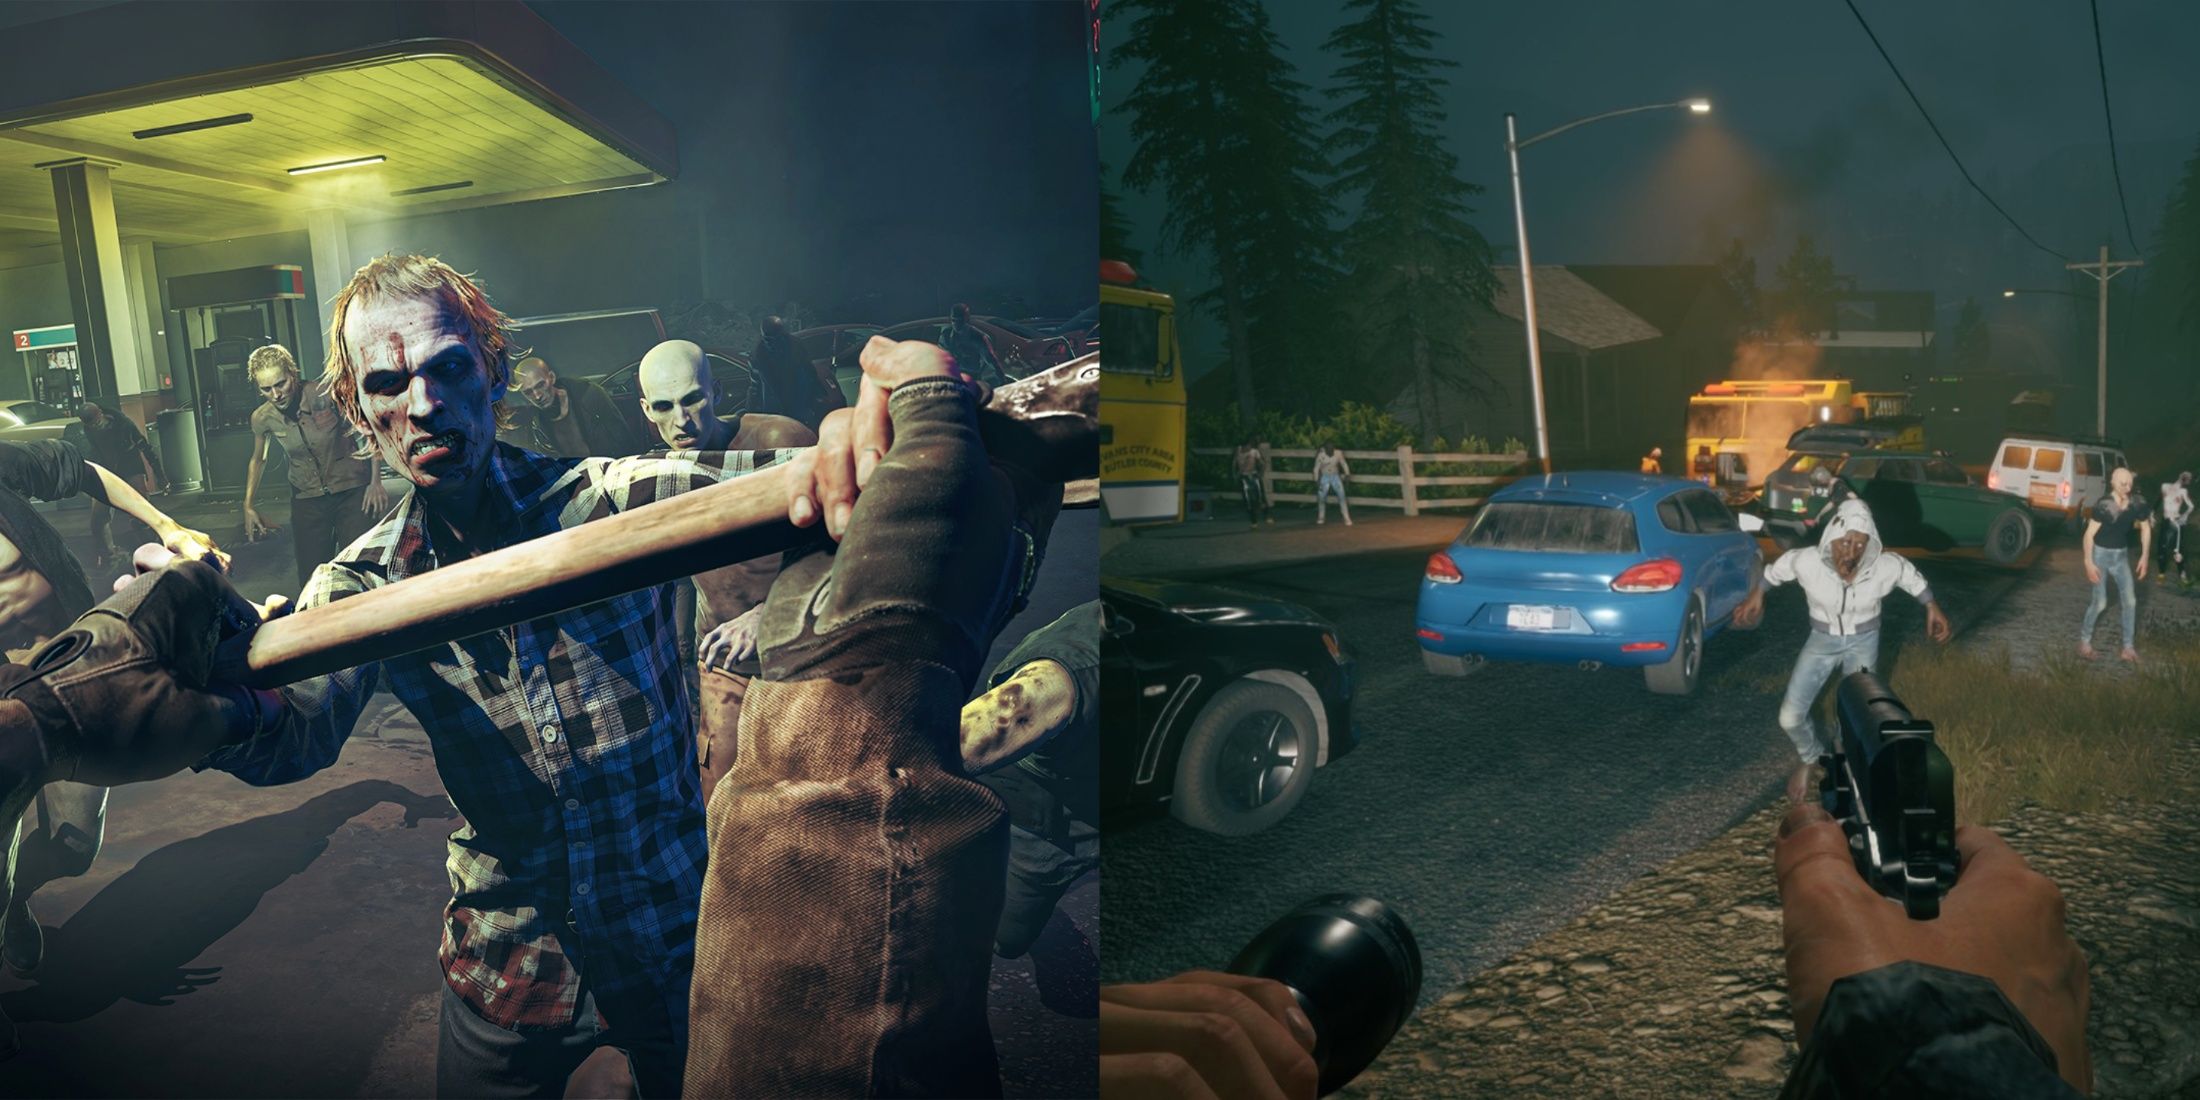 Screenshots from No More Room in Hell 2 side by side.